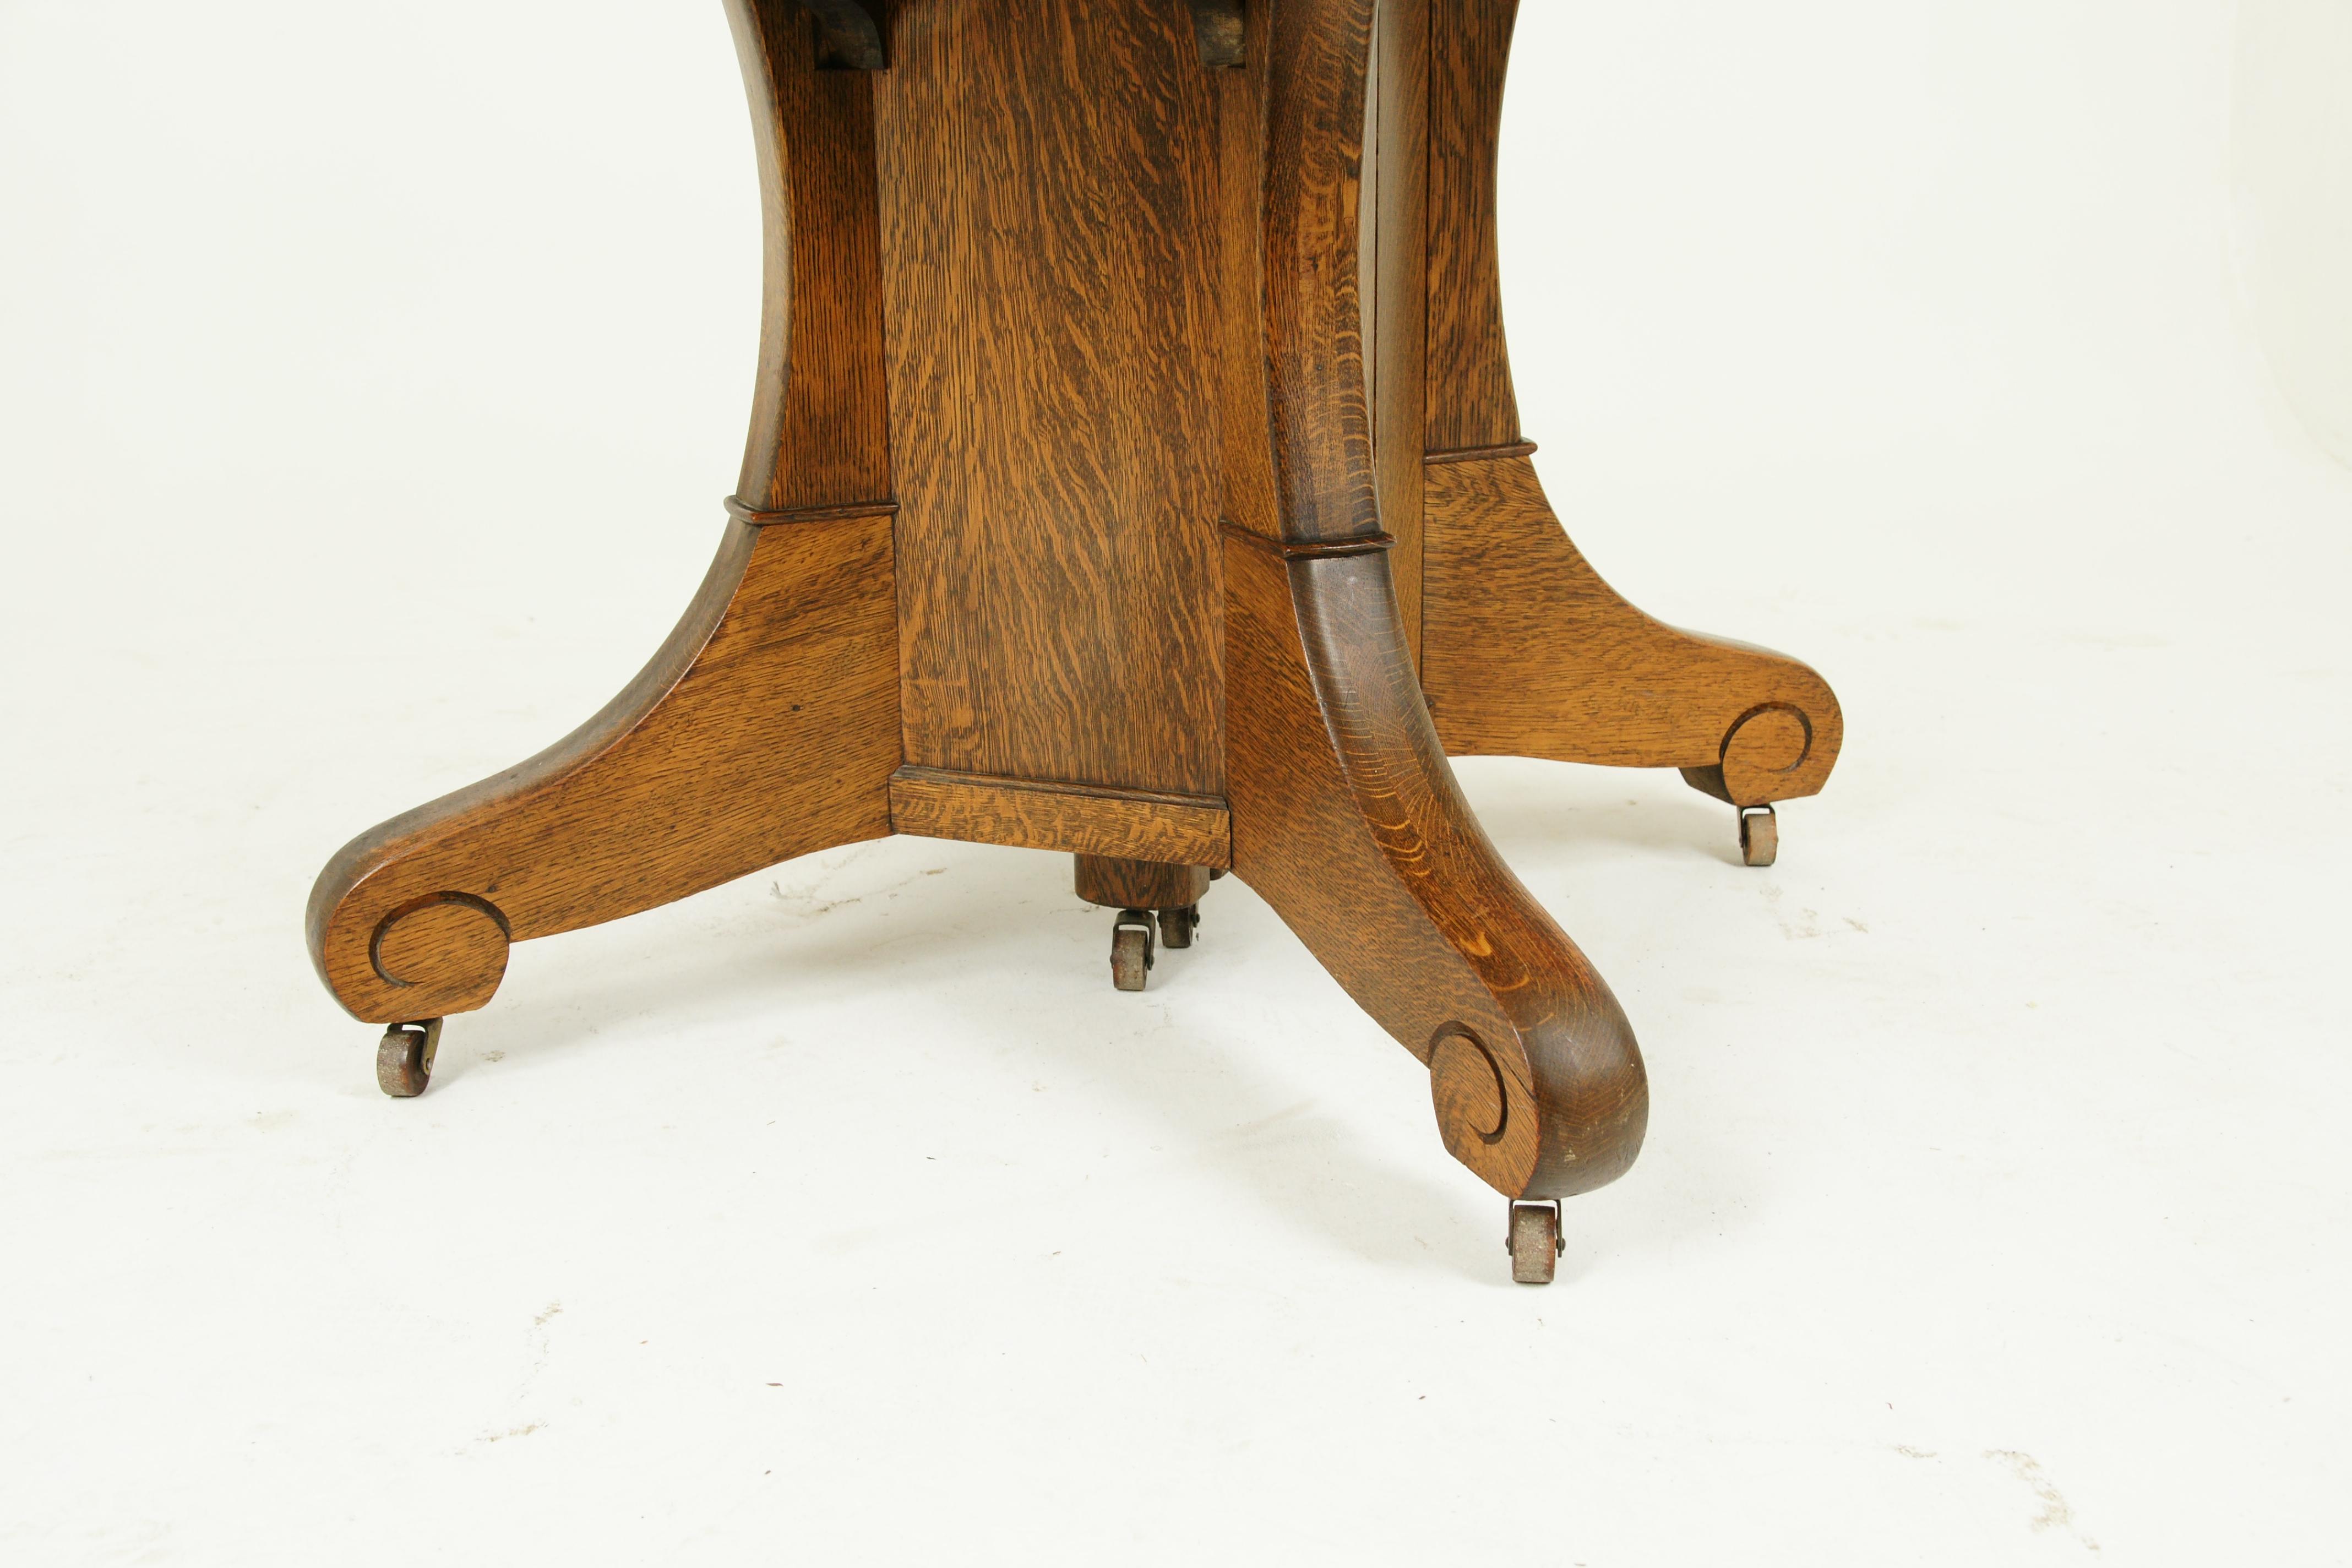 Canadian Antique Dining Table, Pedestal Table, Vintage Oak Table, Canada, 1900